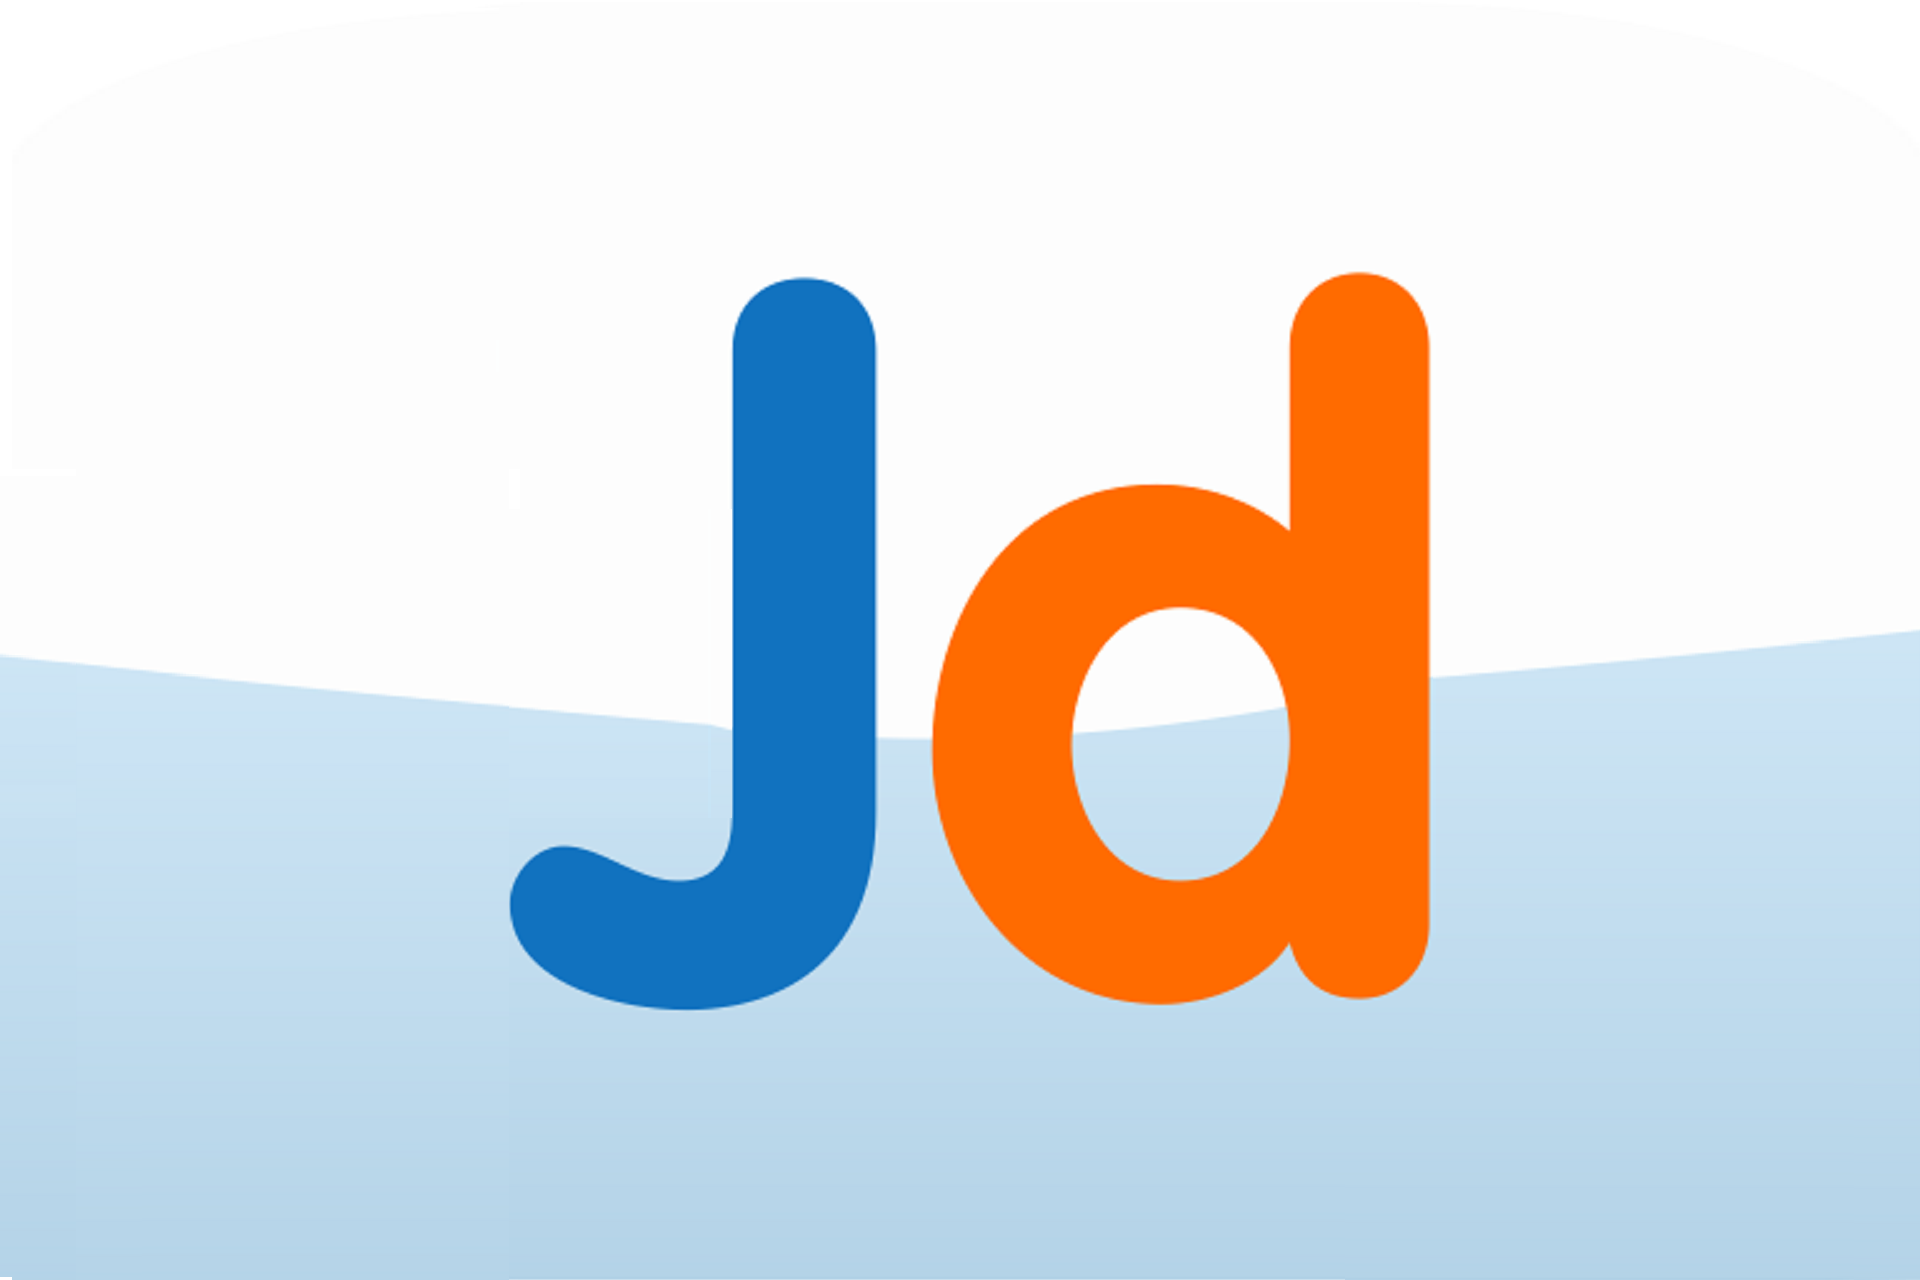 Justdial App: How to download and use it